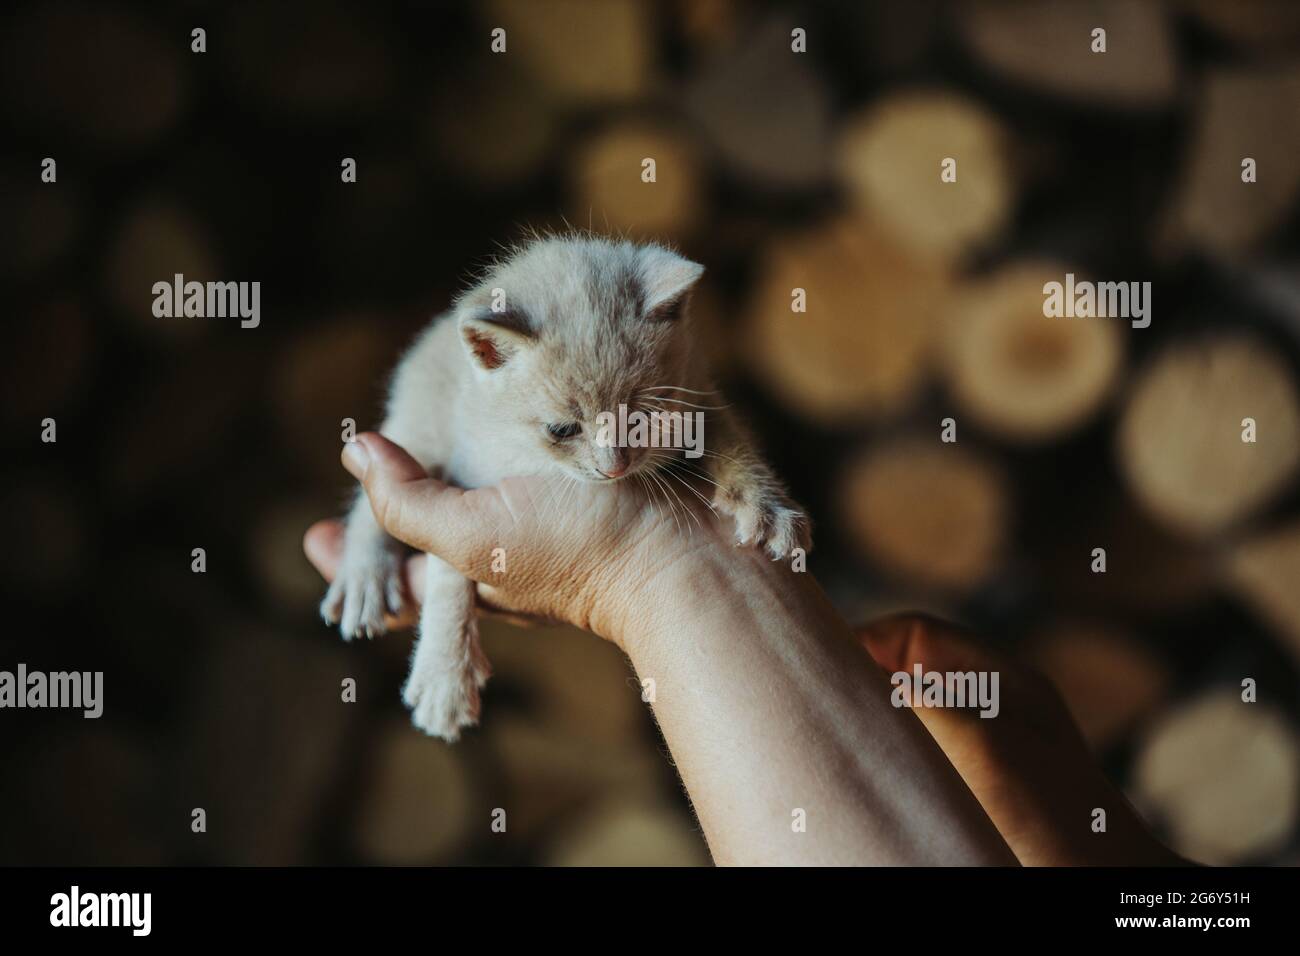 Closeup of a person holding an adorable fluffy small brown  kitten Stock Photo